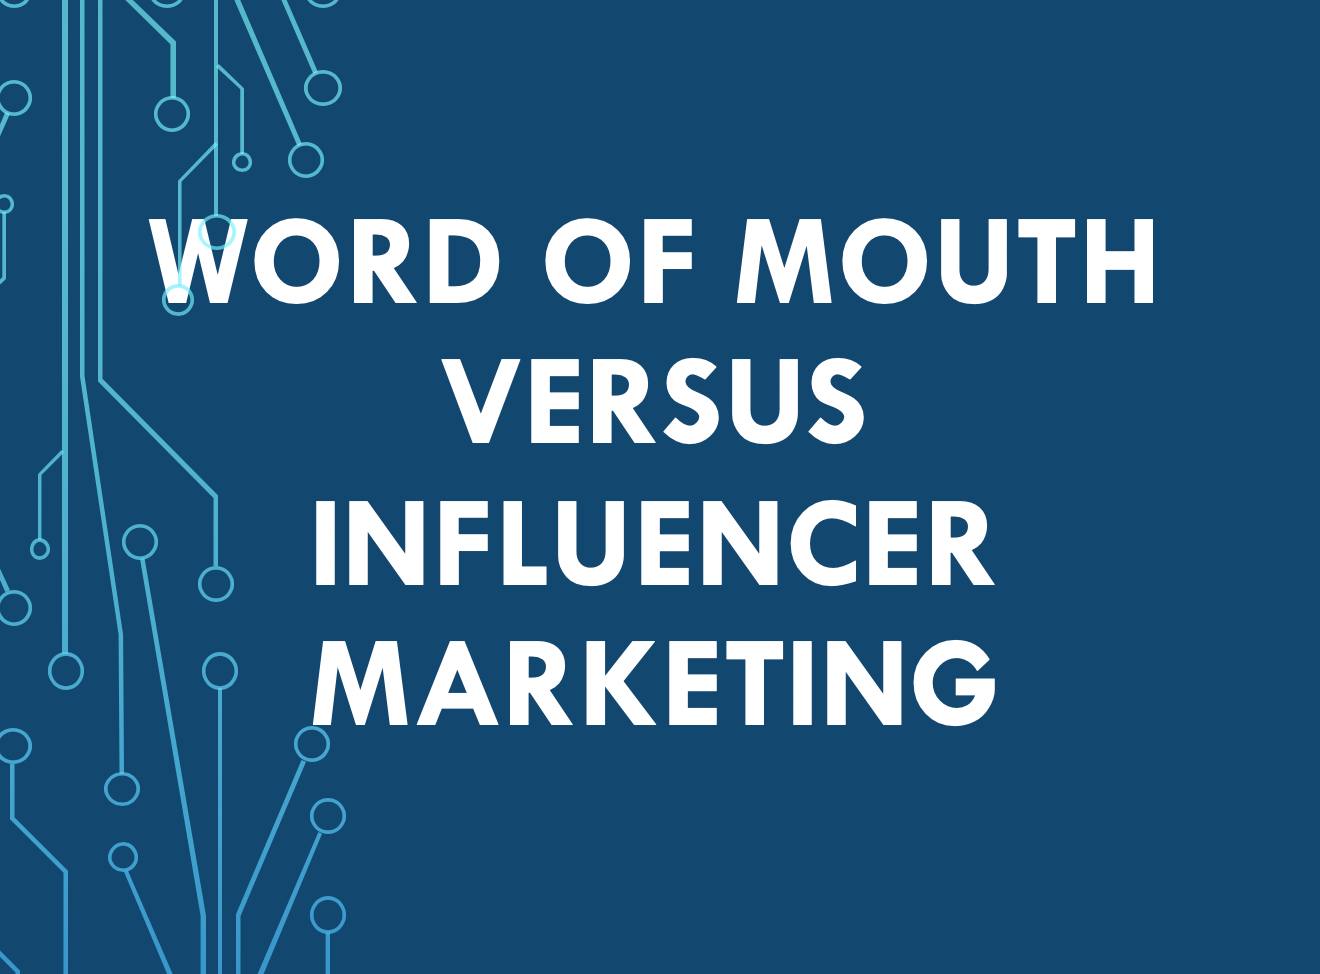 What’s the difference between influencer marketing and word of mouth marketing?